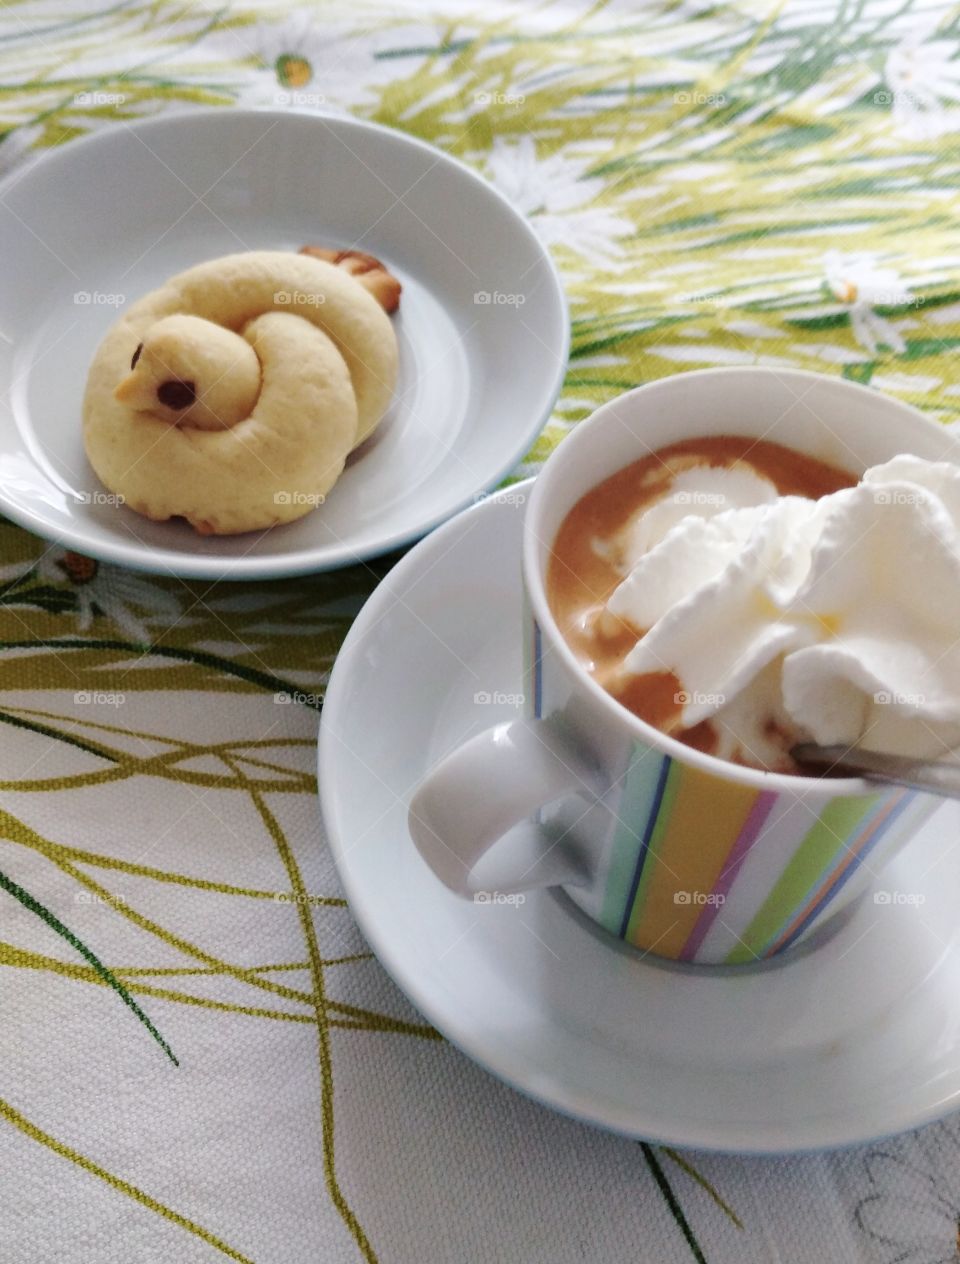 Coffee with cream and canary-shaped biscuit